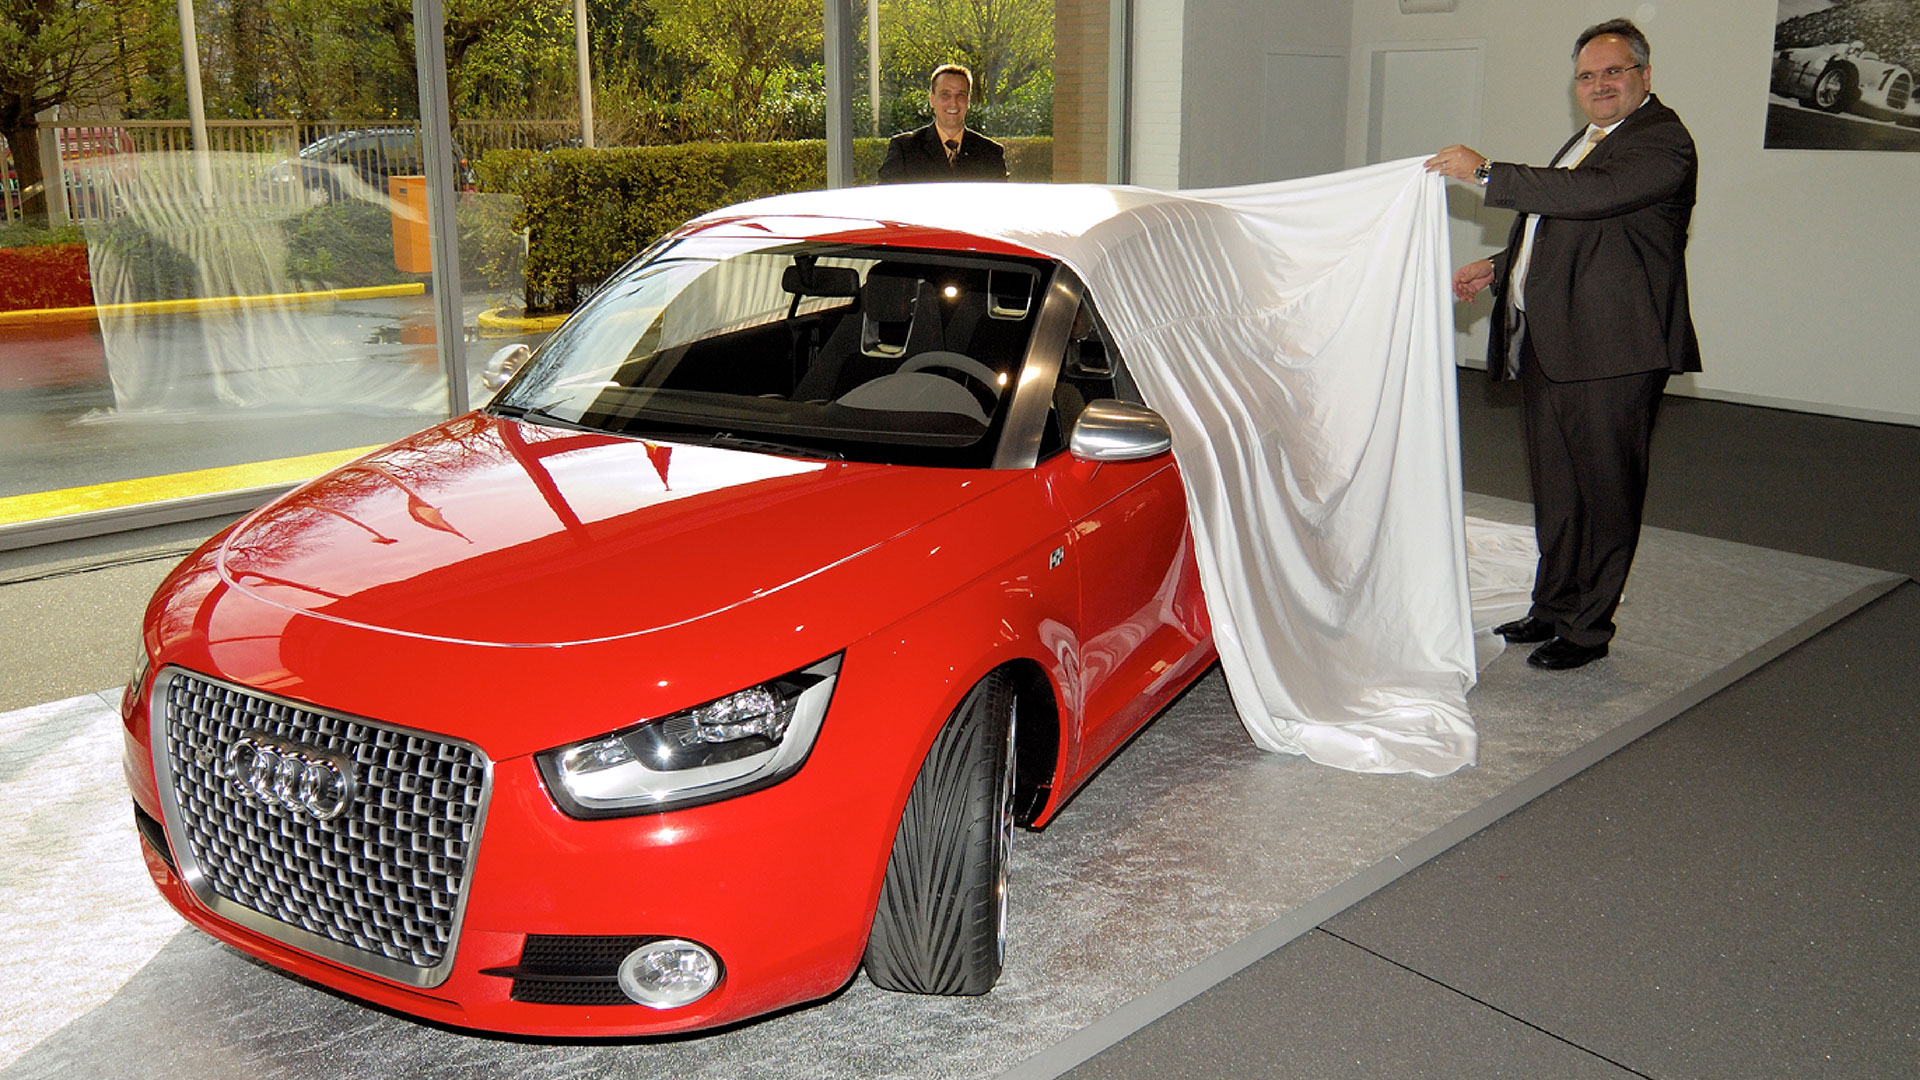 Ann old red Audi model being unveiled by 2 people in the showroom